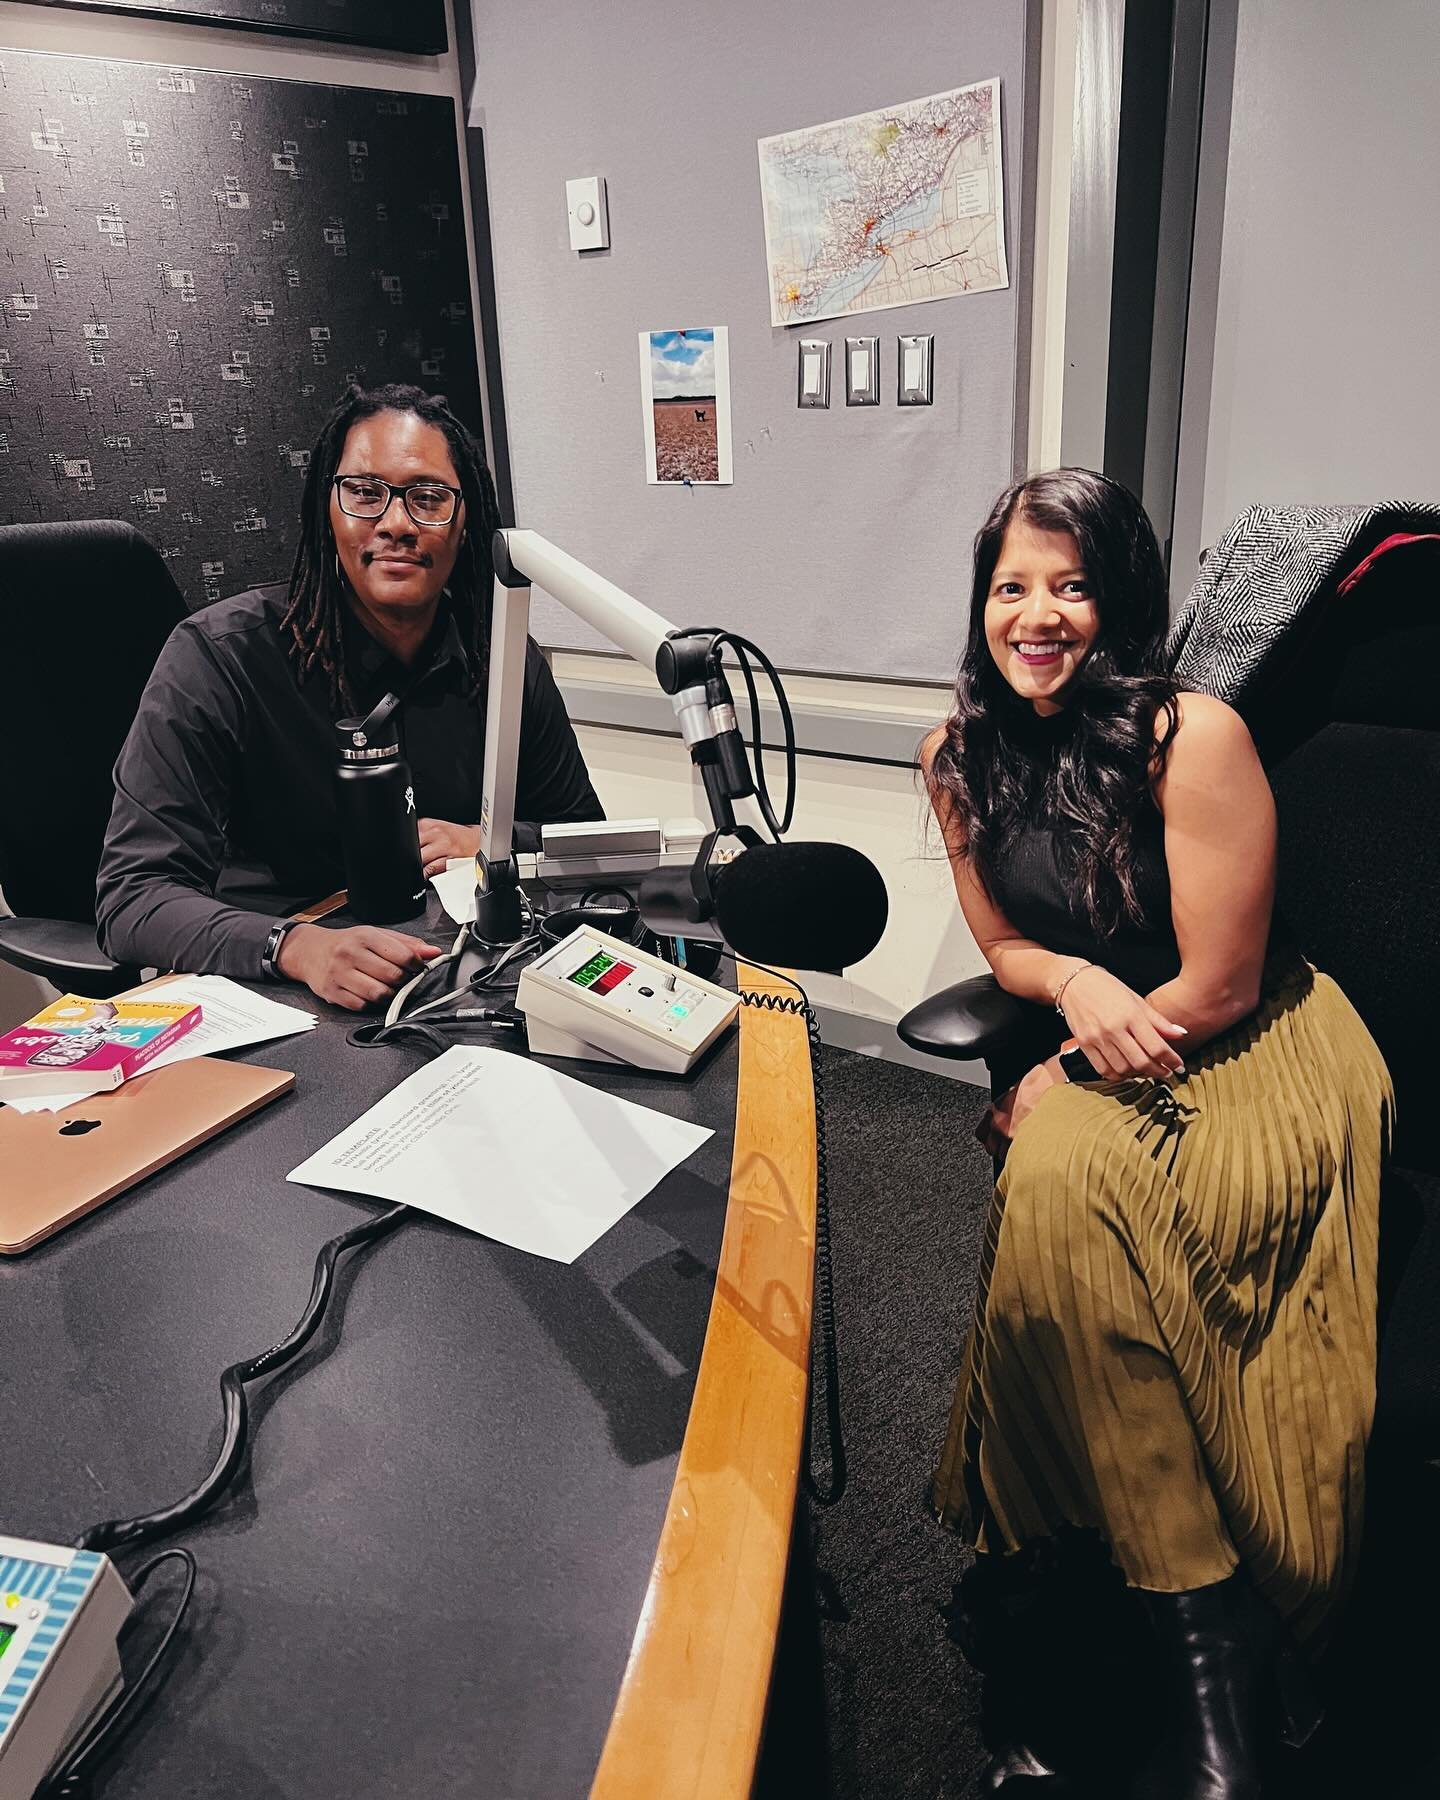 About a month ago, I got to do something cool: sit down with the ever gracious @ryanbpatrick for a @cbcradio Next Chapter interview to talk about my new book, Peacocks of Instagram. Thank you Ryan for a warm and insightful conversation. 
You can list